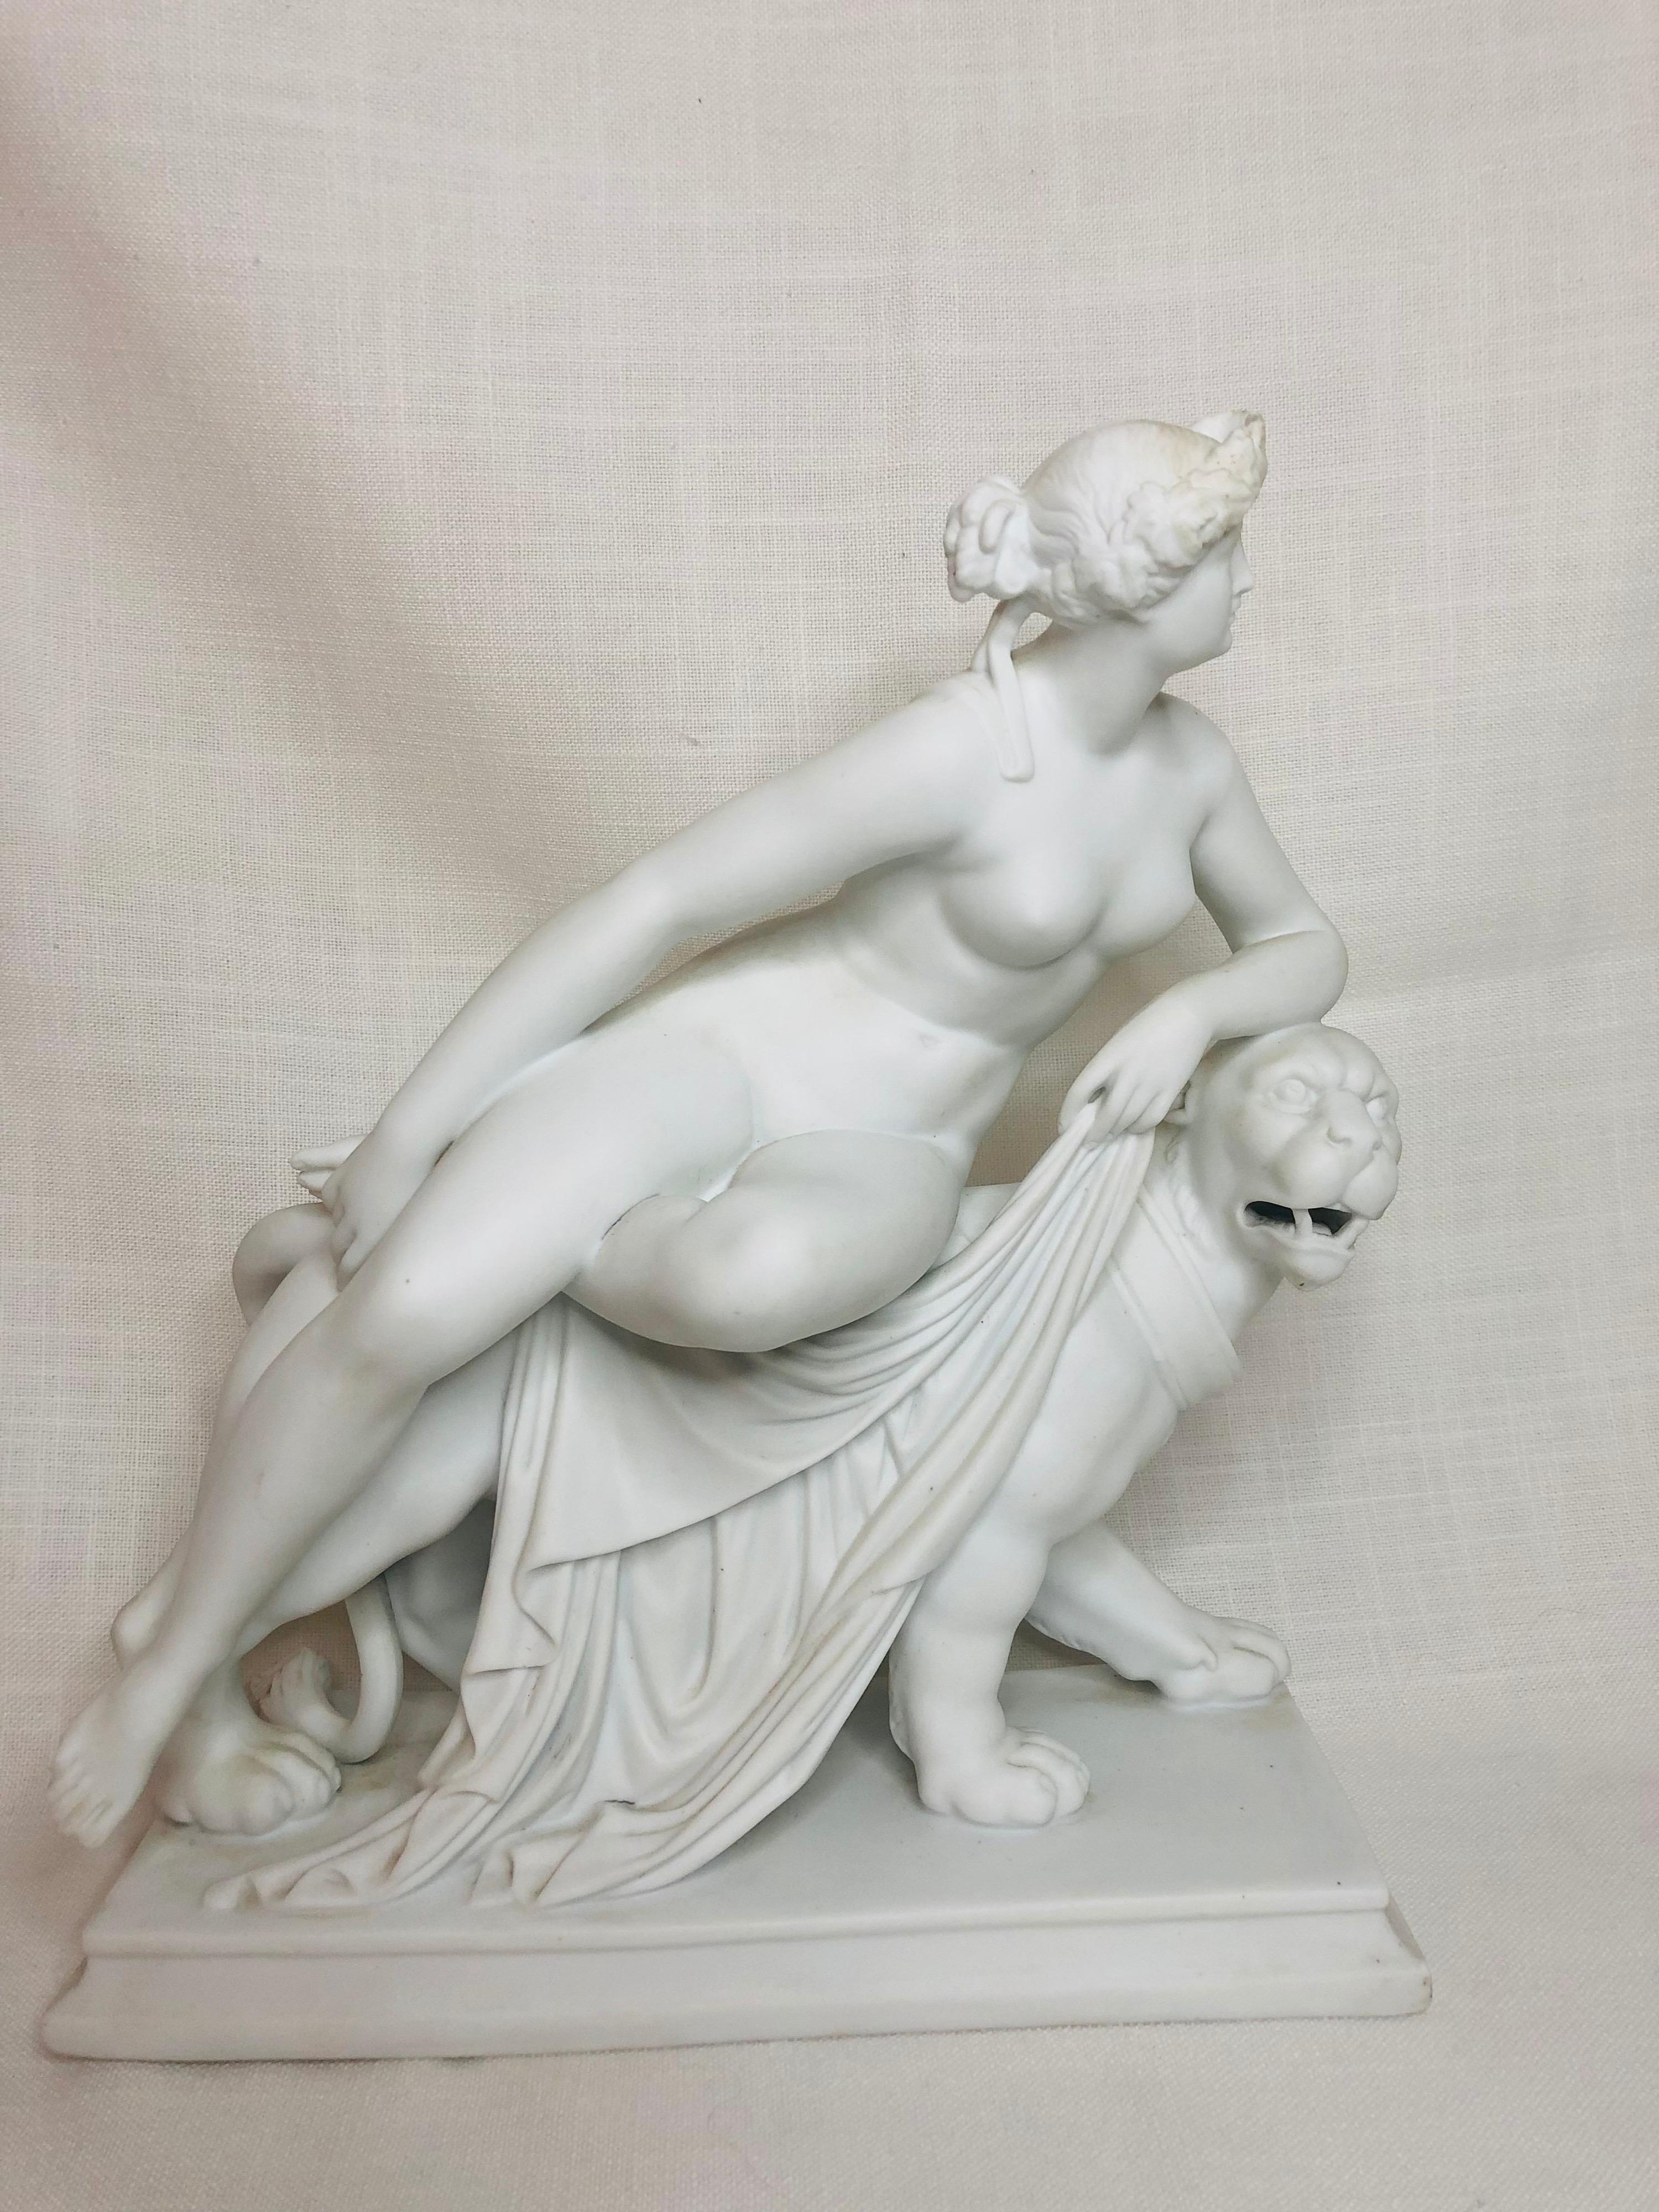 English Parian Figurine of a Nude Figure of Adriadne Riding on Top of a Panther 1